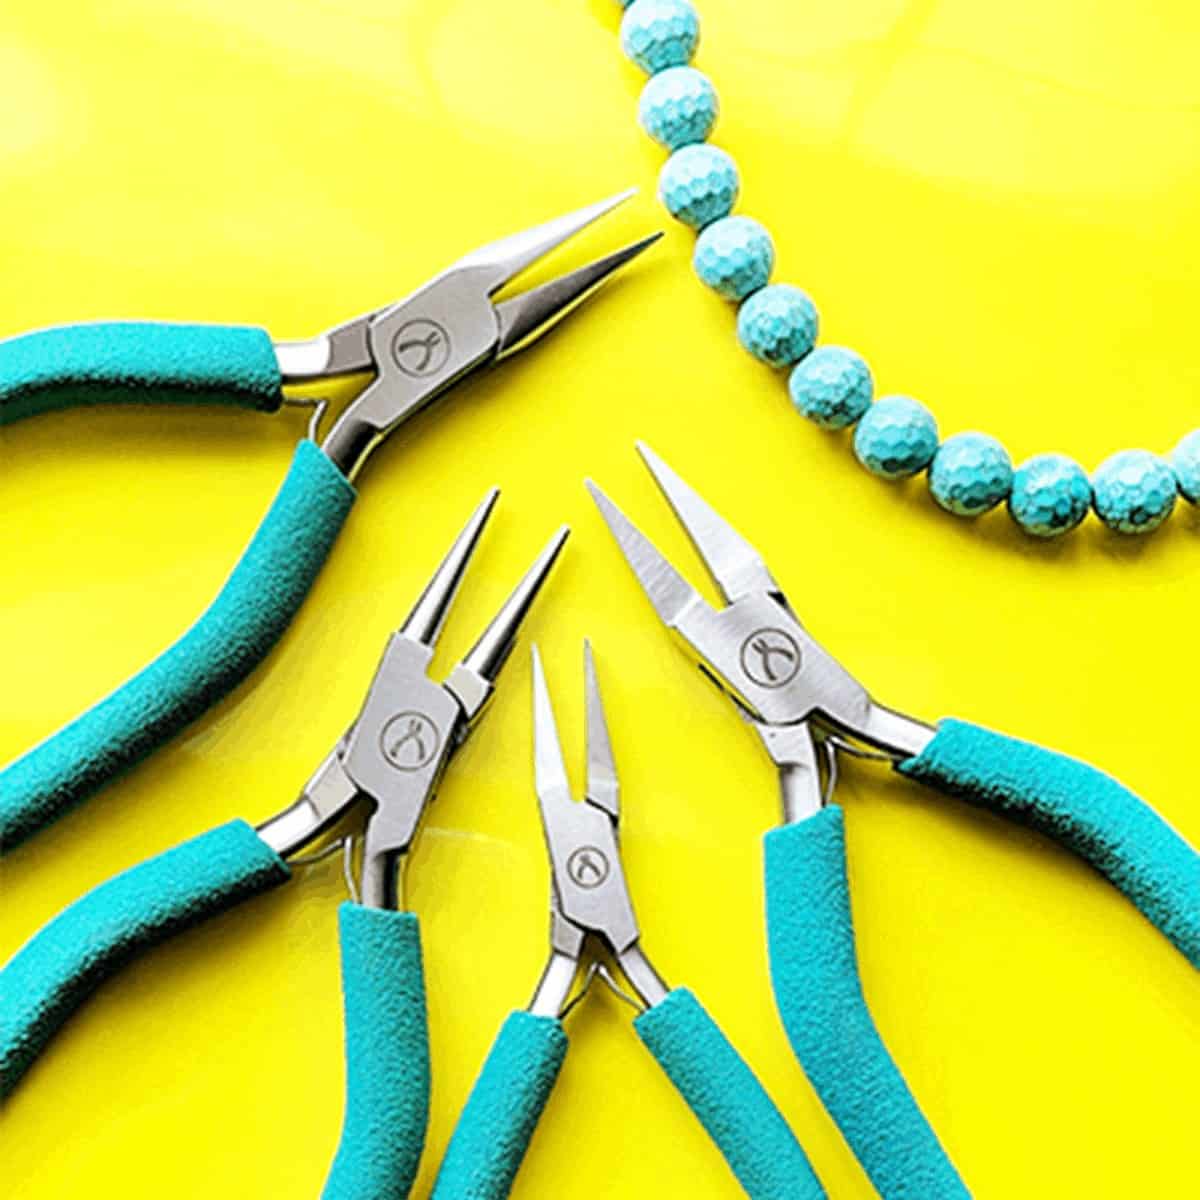 Beginner’s Guide To Jewelry Making Tools